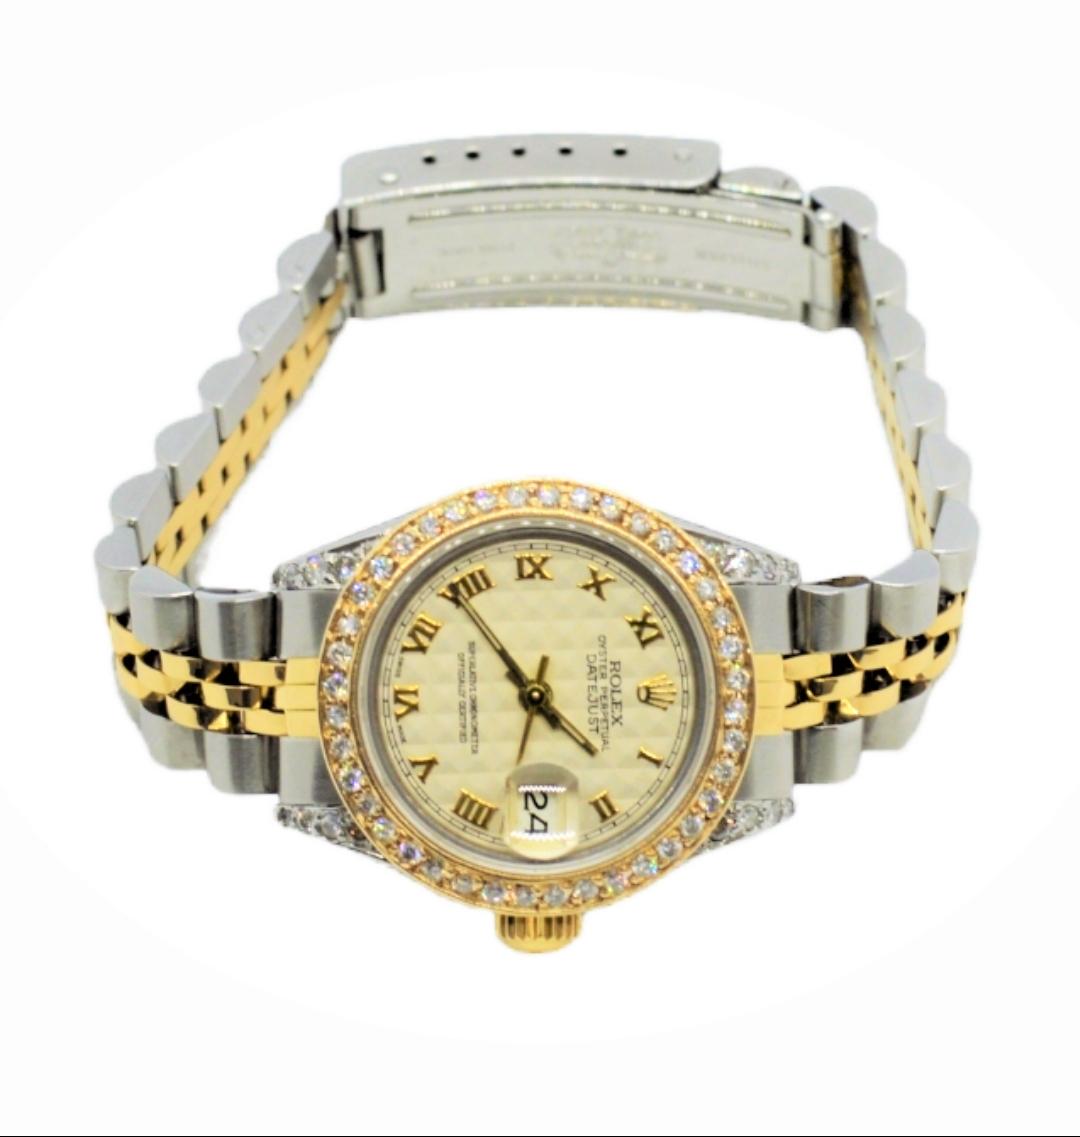 (Watch Description) 
Brand - Rolex
Gender - Ladies 
Model - 69173 Datejust
Metals - Yellow Solid Gold
Case size - 26mm
Bezel - Yellow gold Diamond
Crystal - Sapphire
Movement - Automatic Cal.2135
Dial - Pyramod Roman 
Wrist band - Yellow solid